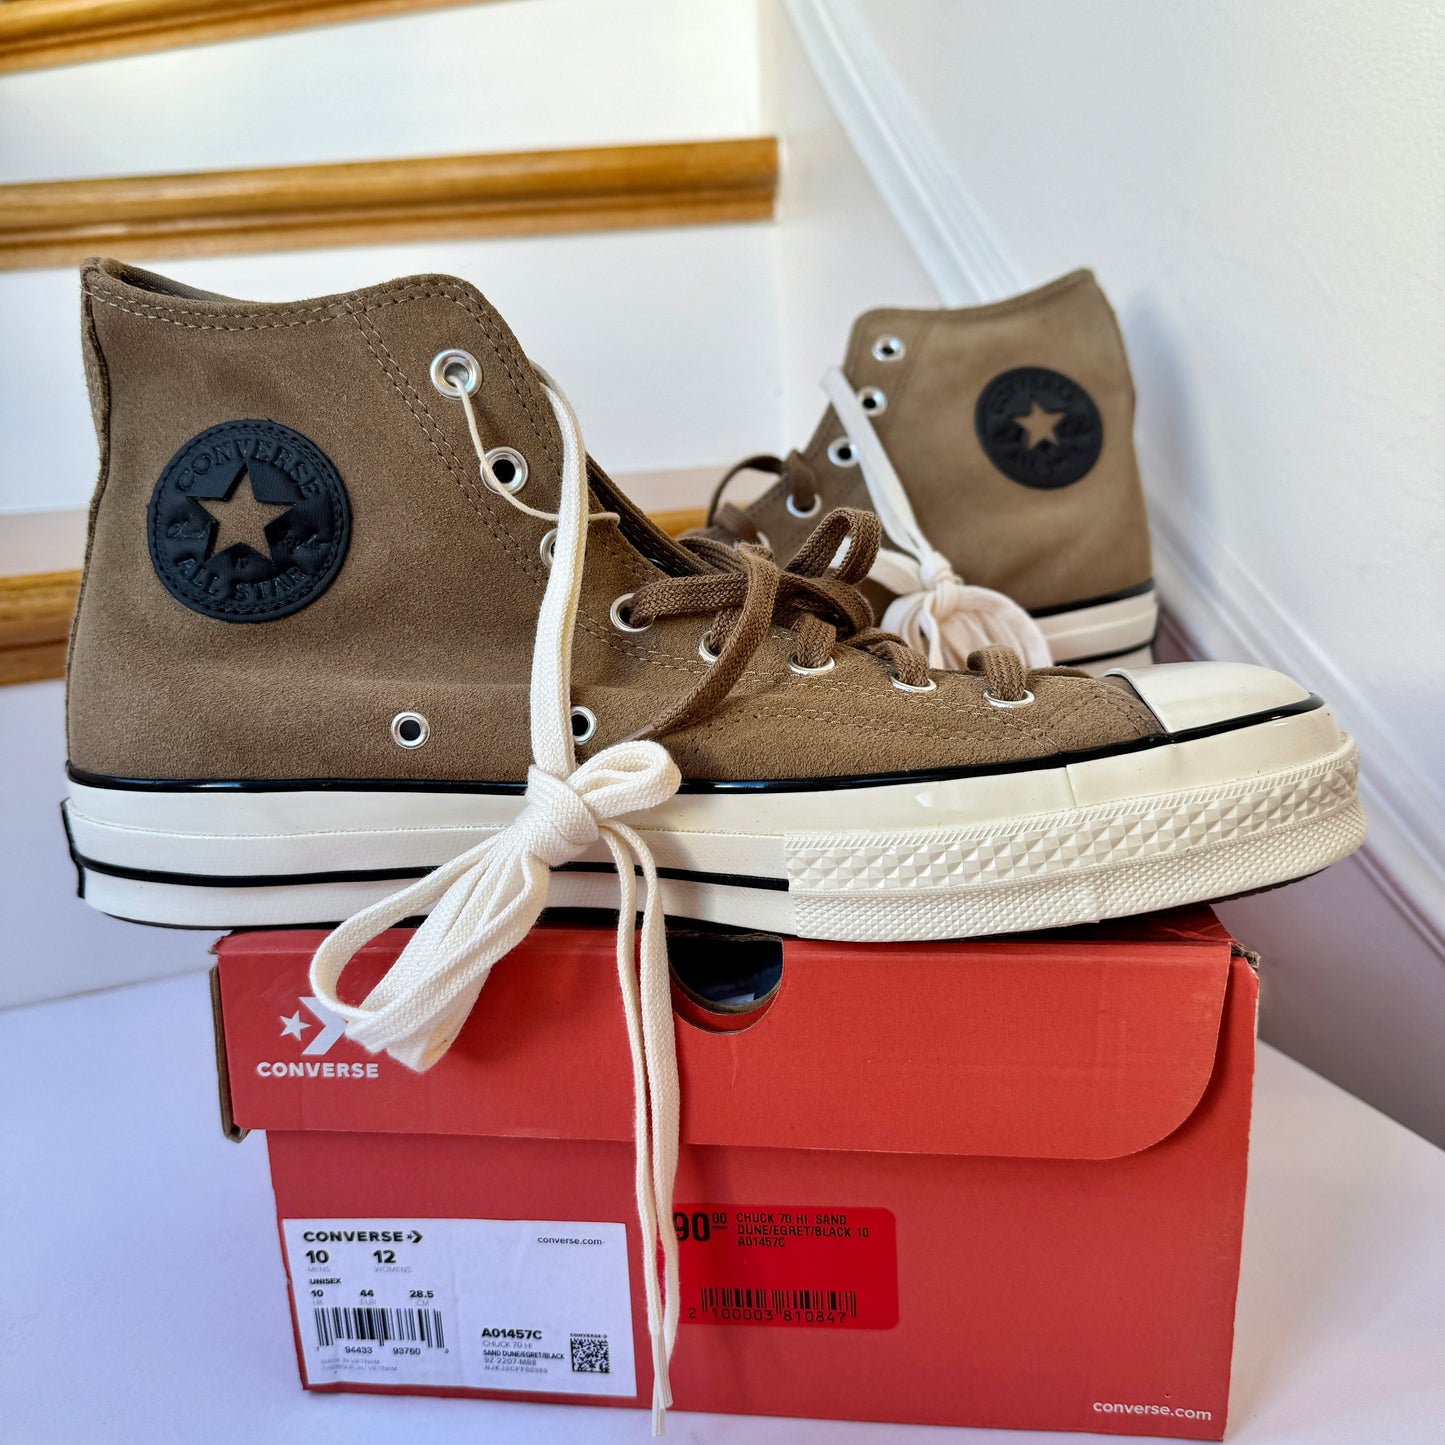 Converse Chuck 70 Hi Suede High Top Sneakers Sand Dune Brown Leather shoes